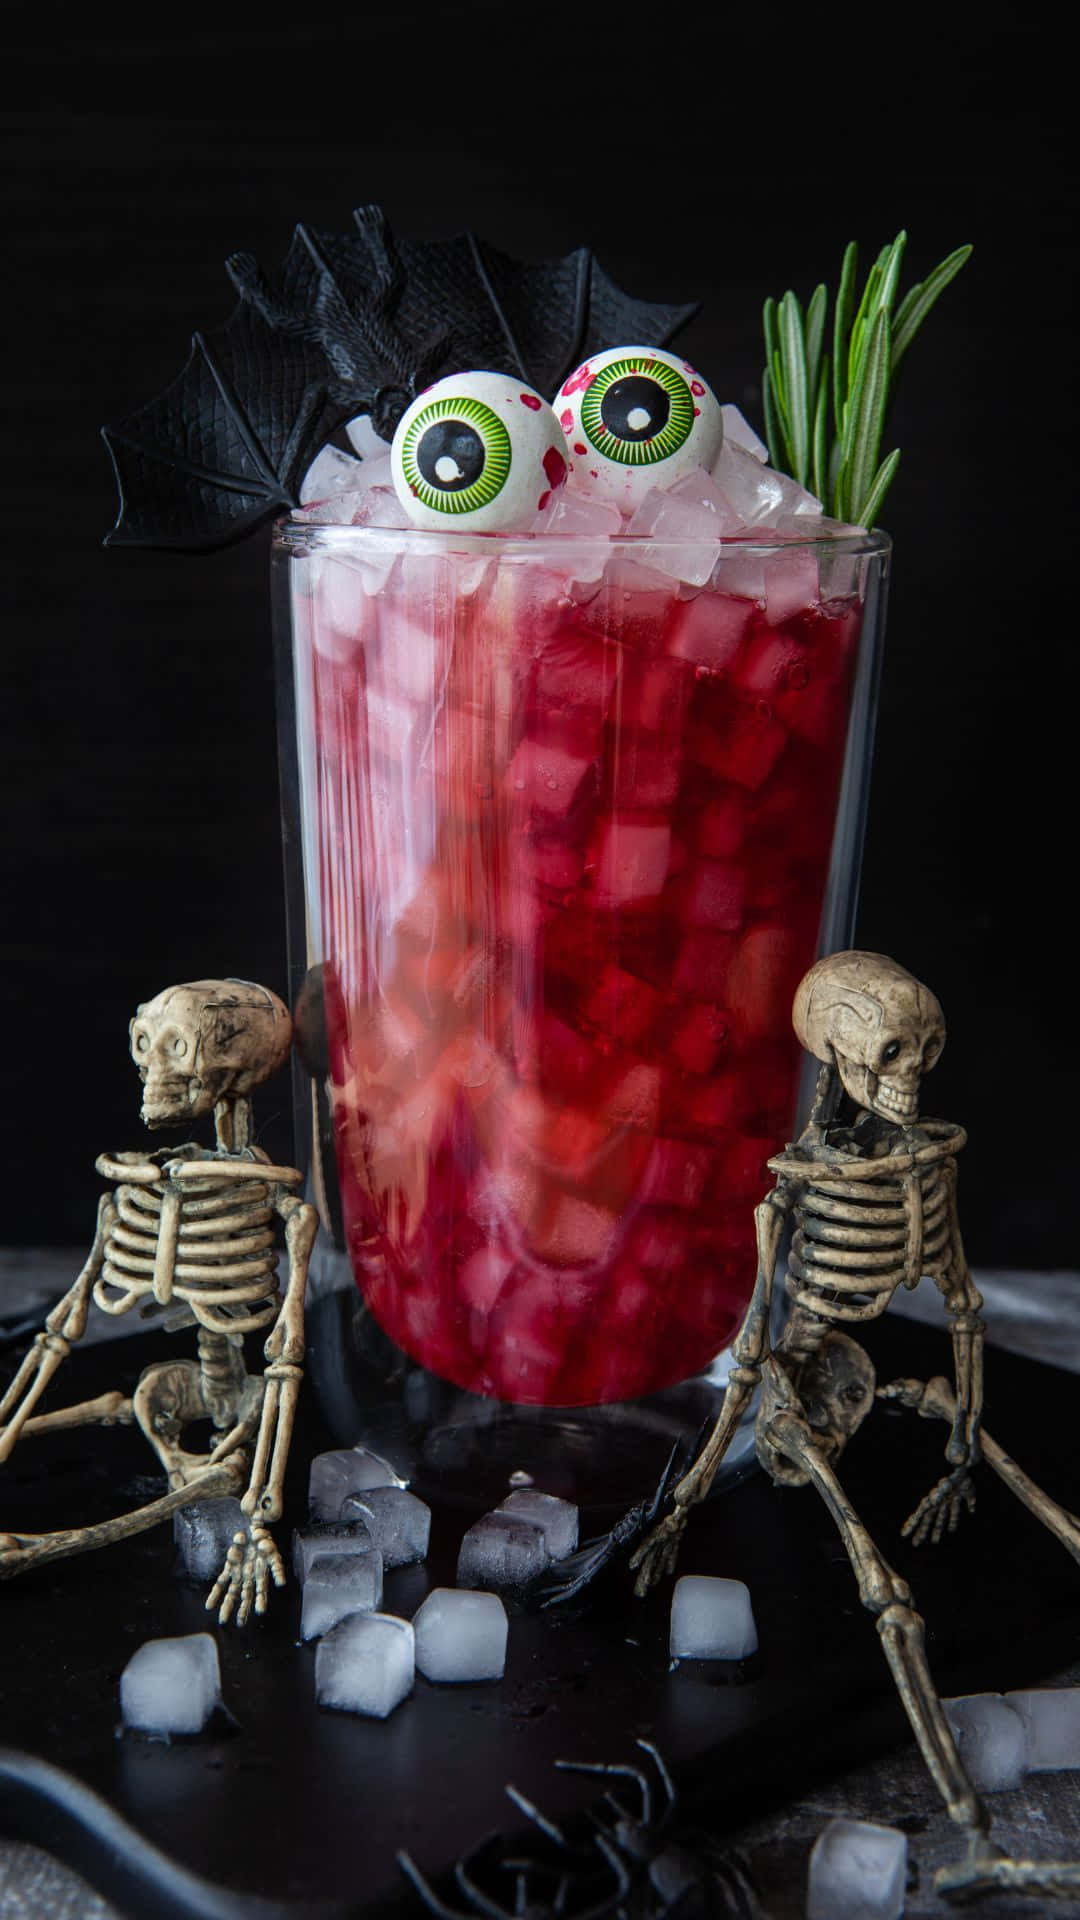 Excitingly spooky drinks to enjoy this Halloween! Wallpaper